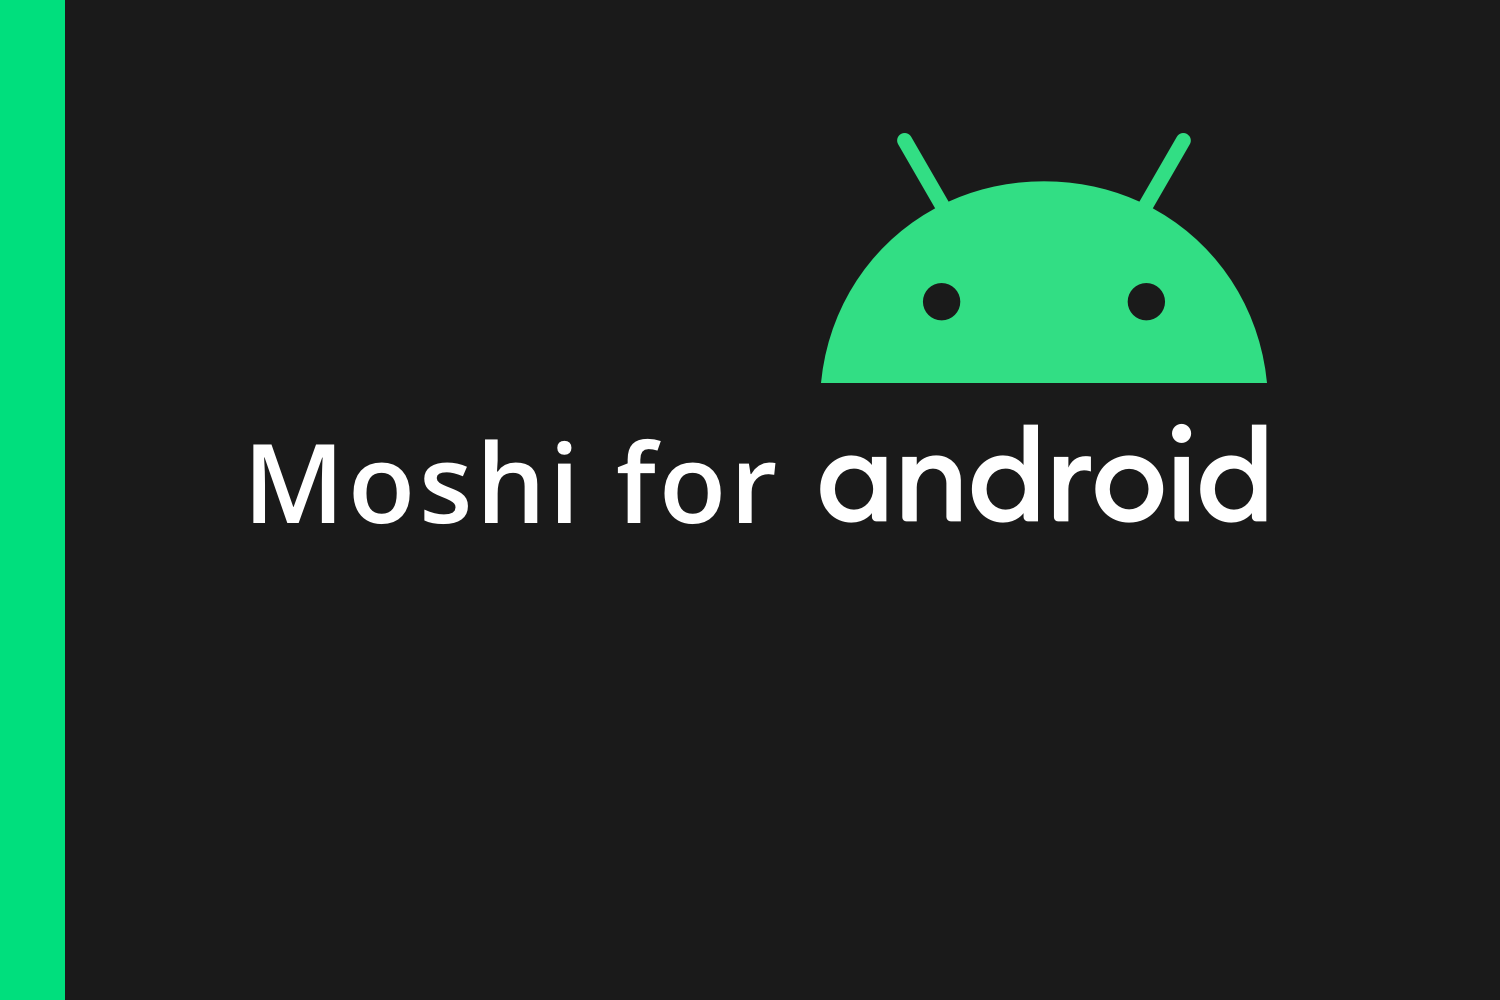 Moshi - JSON library for Android